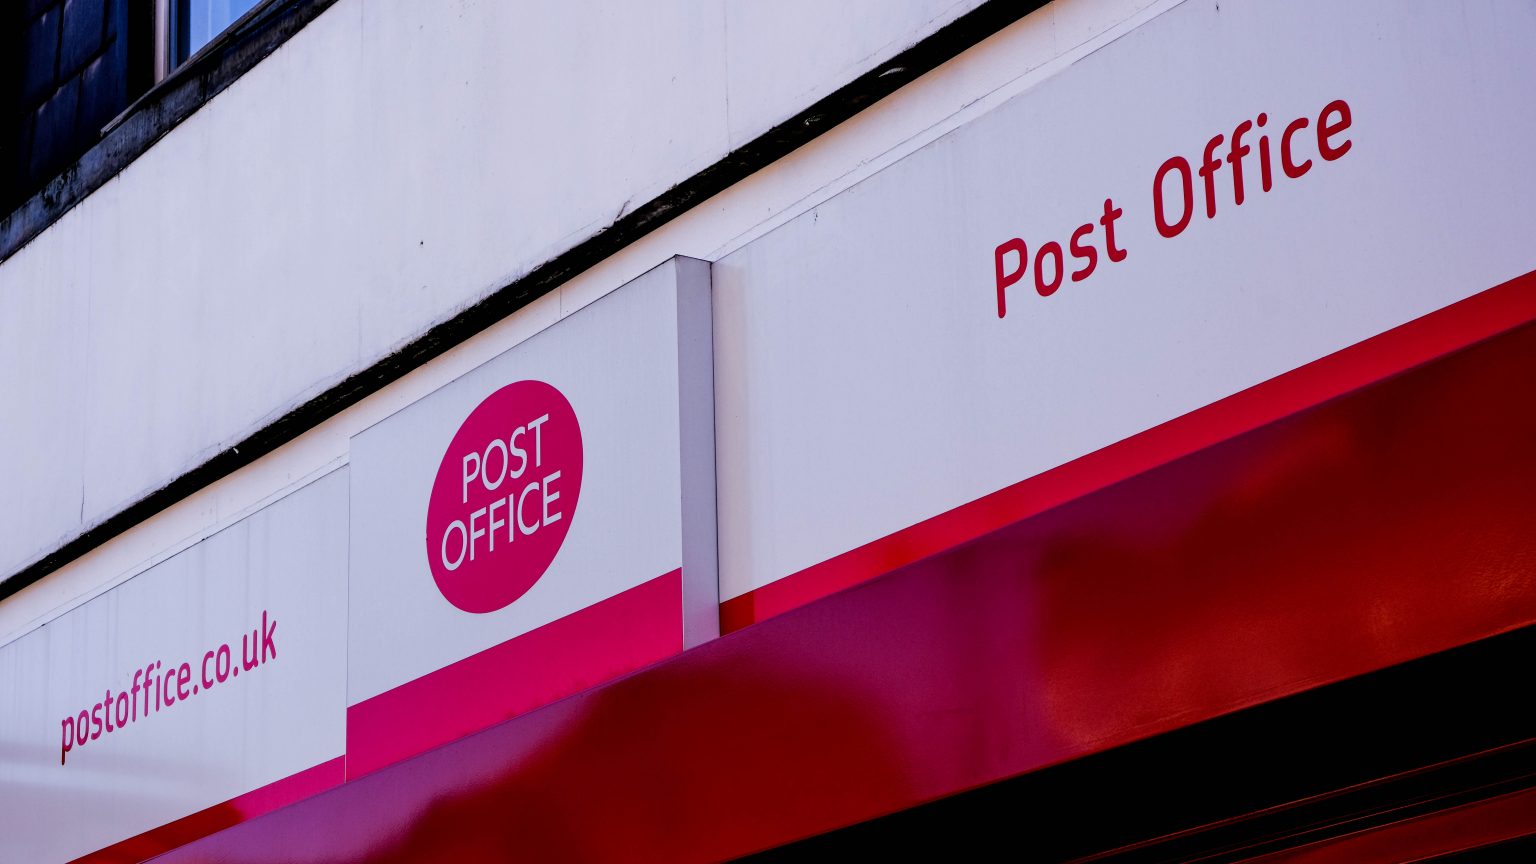 CWU Post Office Pension Scheme members watch out for online seminar